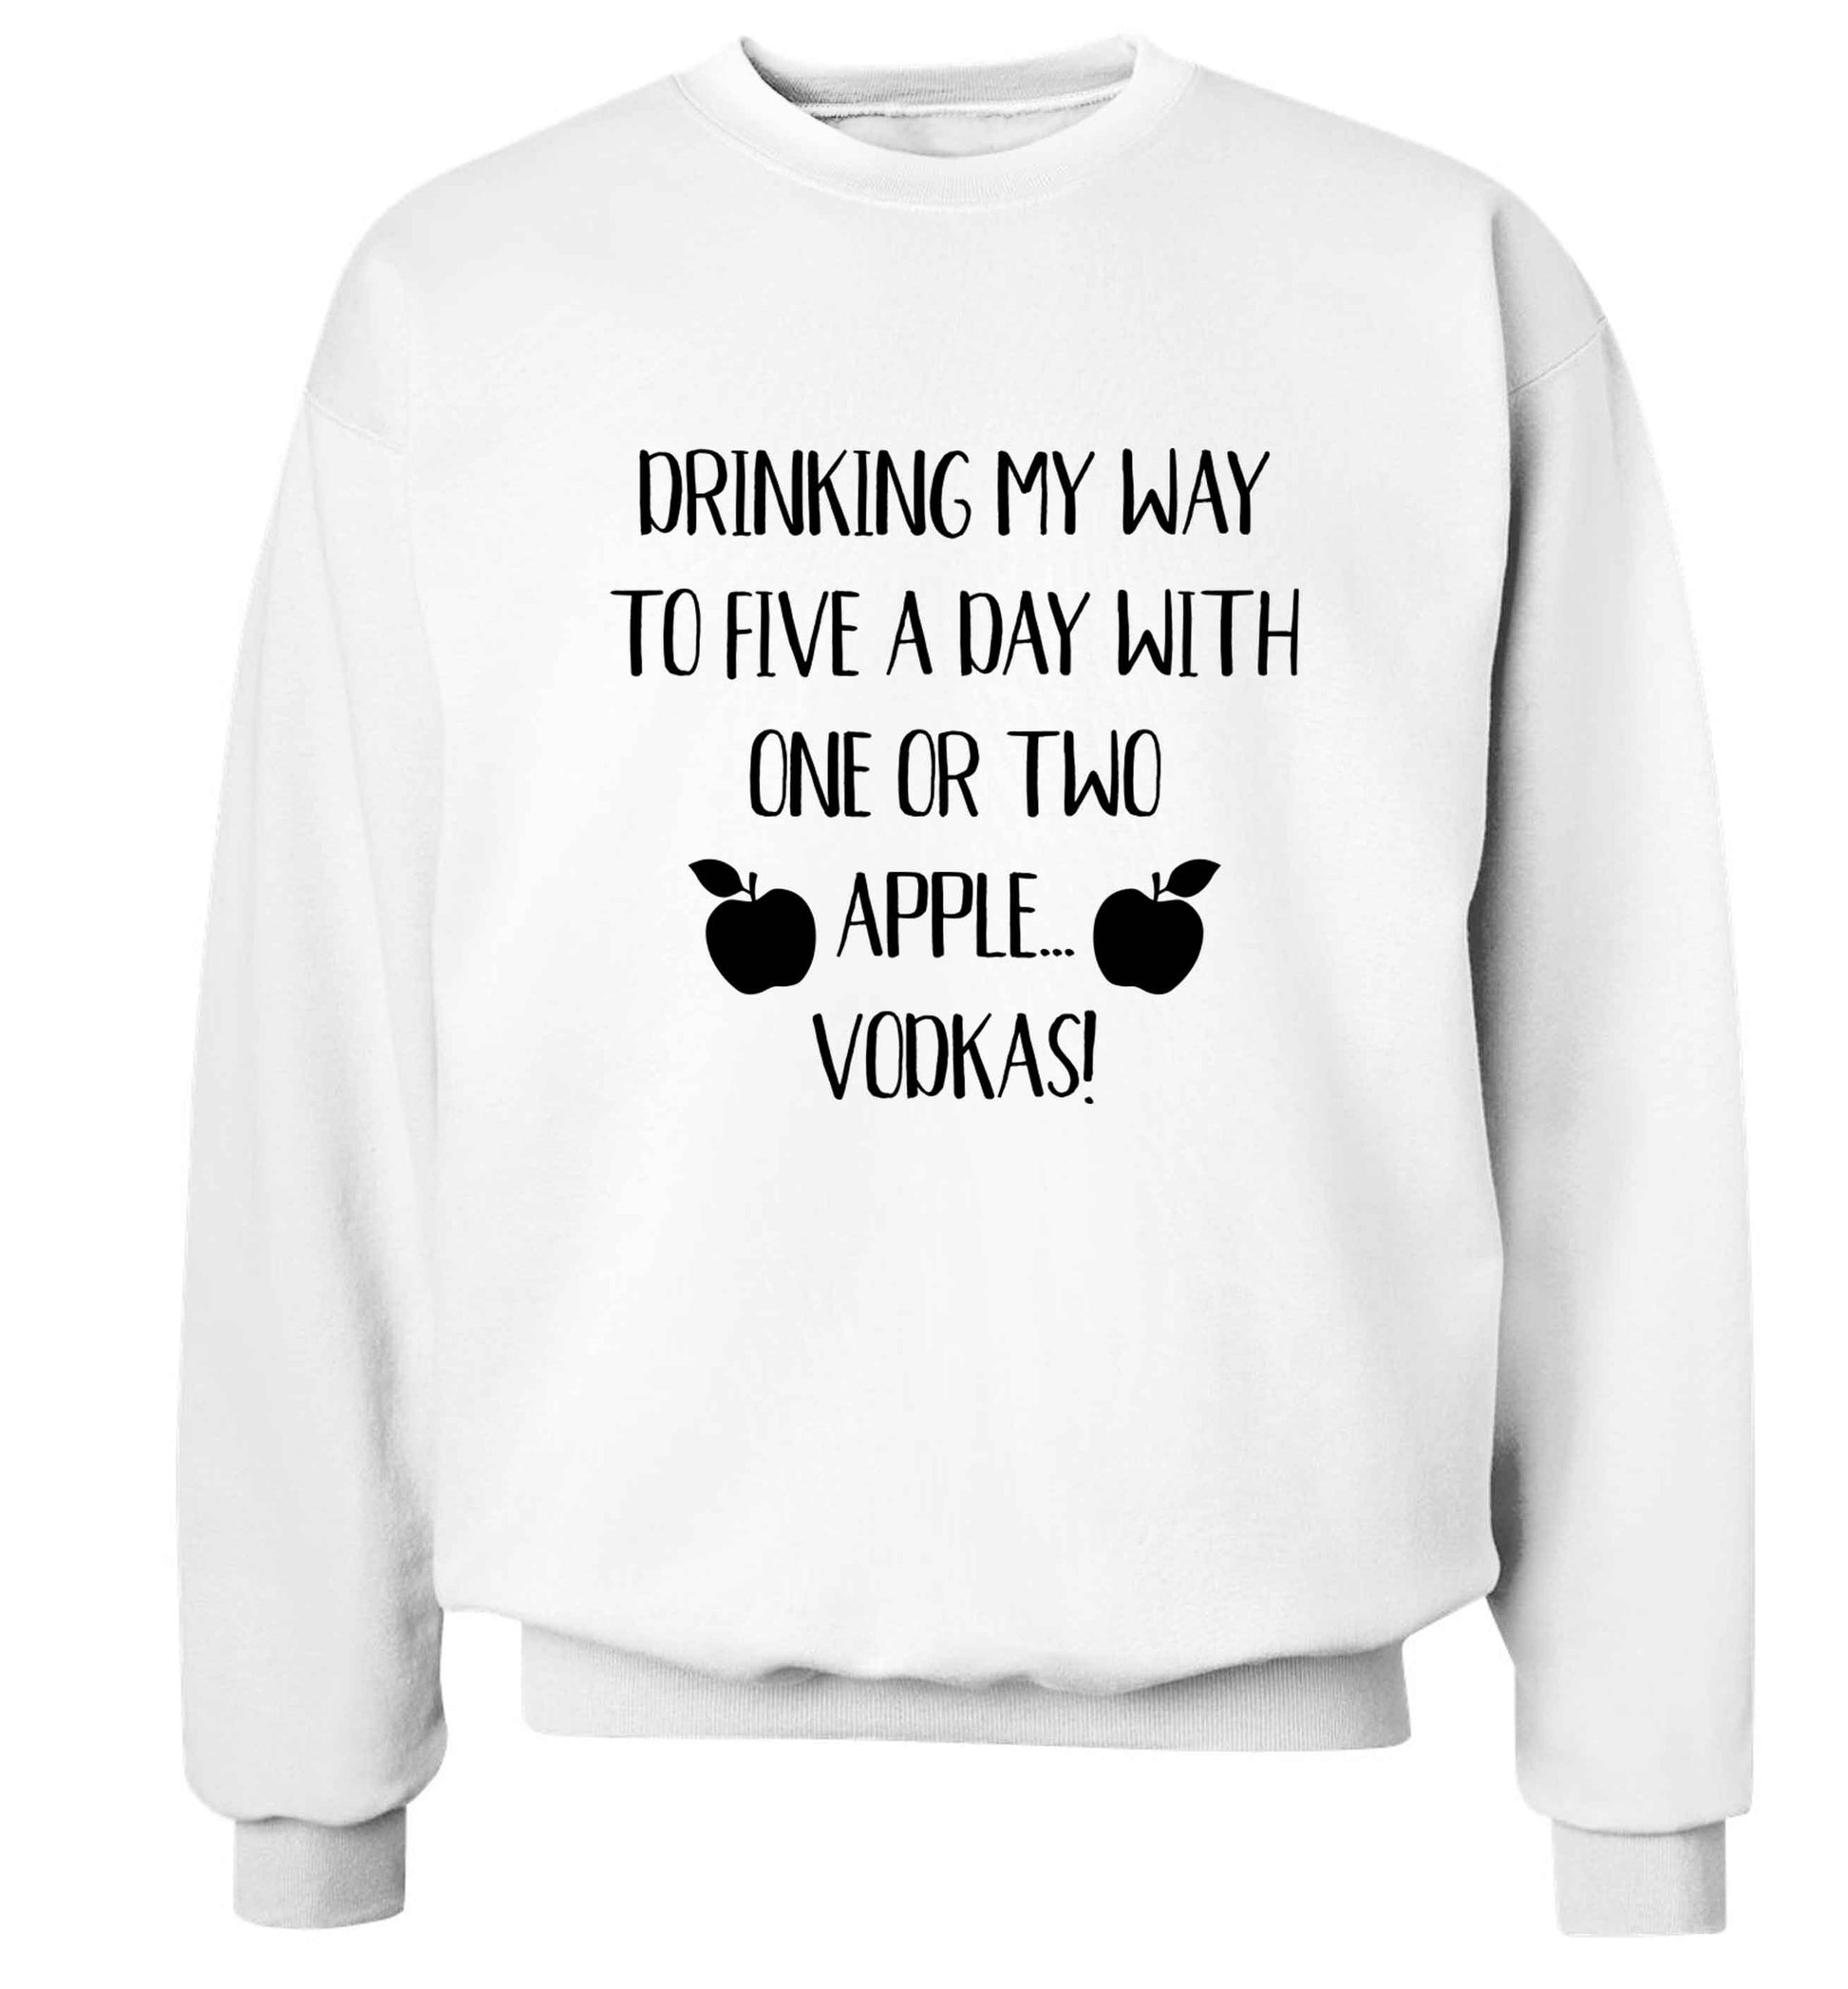 Drinking my way to five a day with one or two apple vodkas Adult's unisex white Sweater 2XL